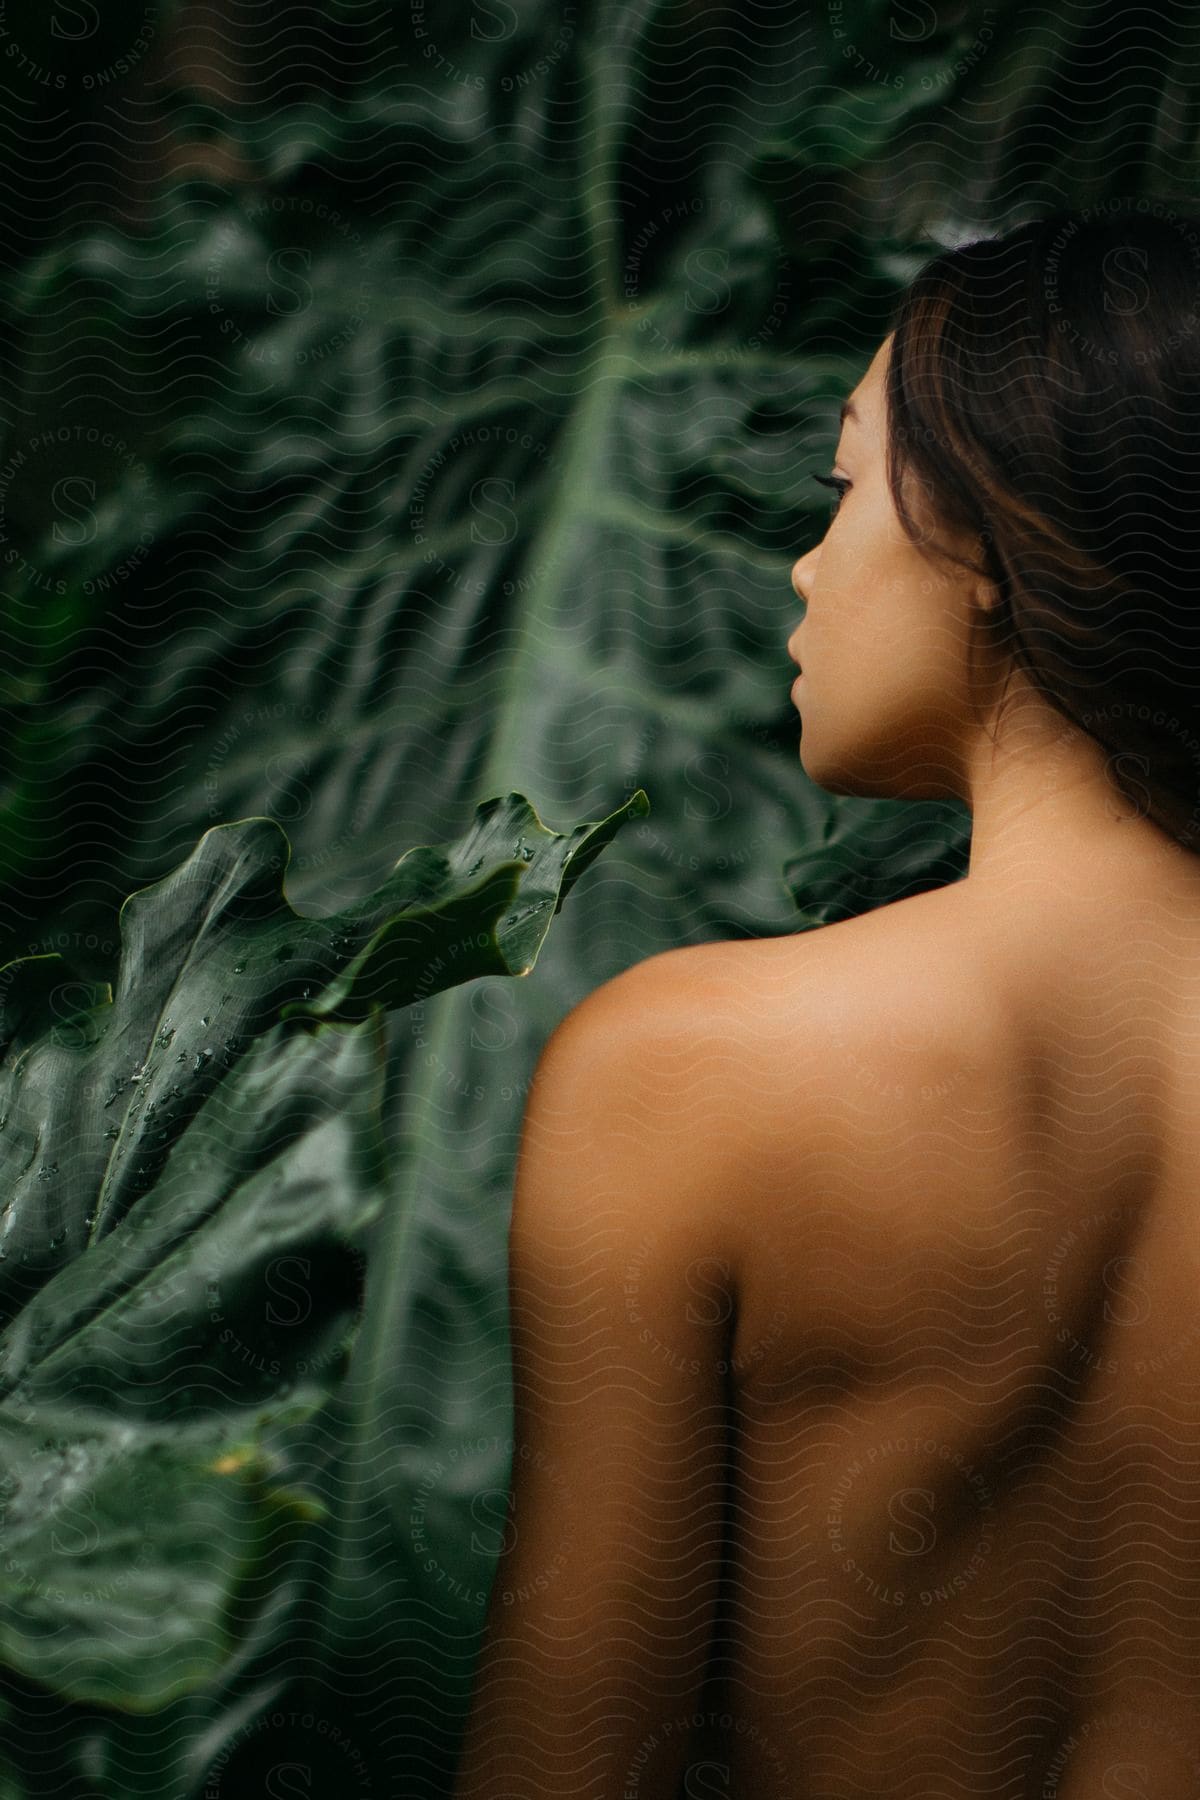 A women is standing with her naked back facing away from the camera staring off into the distance with a reflective look on her face.